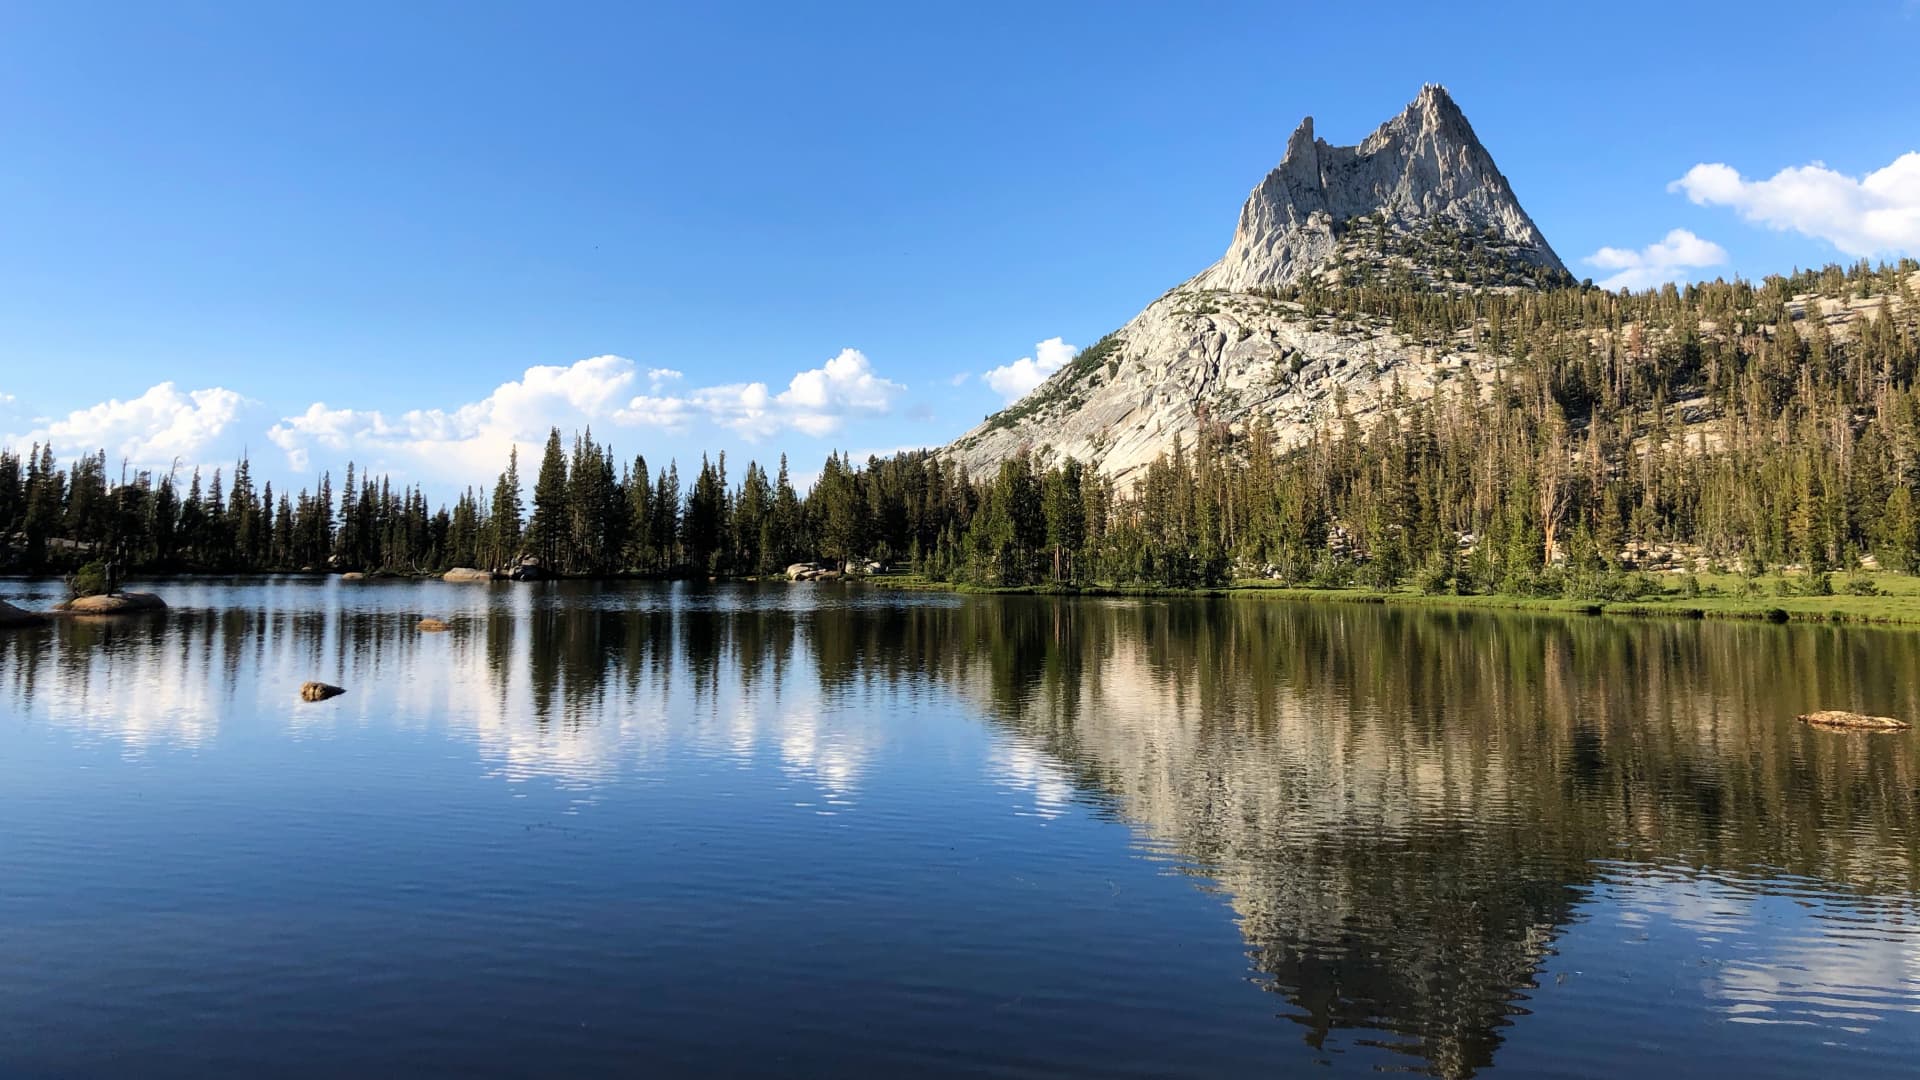 Upper Cathedral Lake in Yosemite National Park.